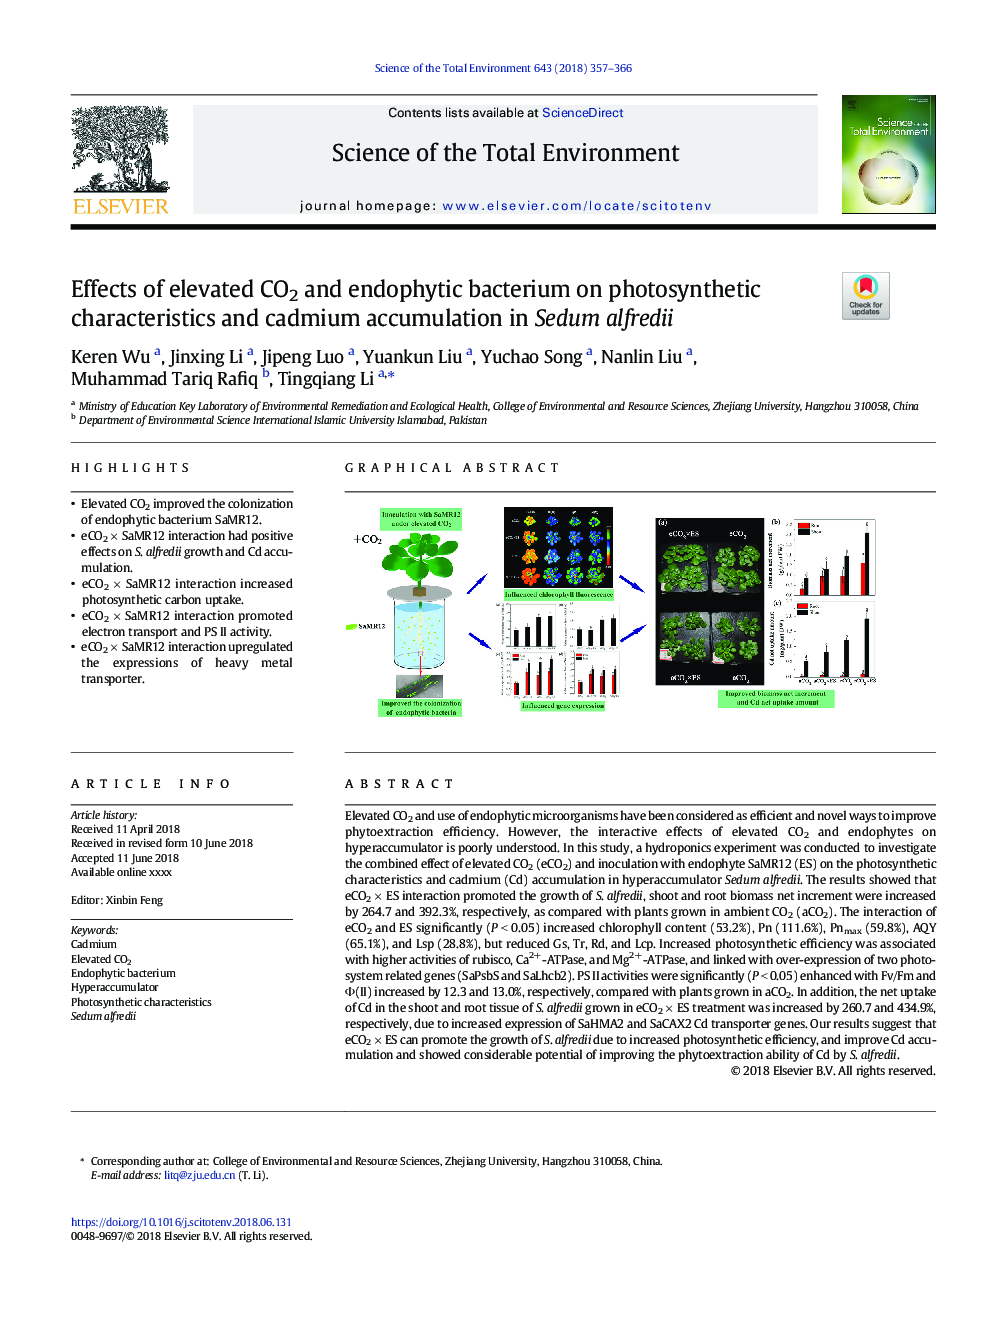 Effects of elevated CO2 and endophytic bacterium on photosynthetic characteristics and cadmium accumulation in Sedum alfredii